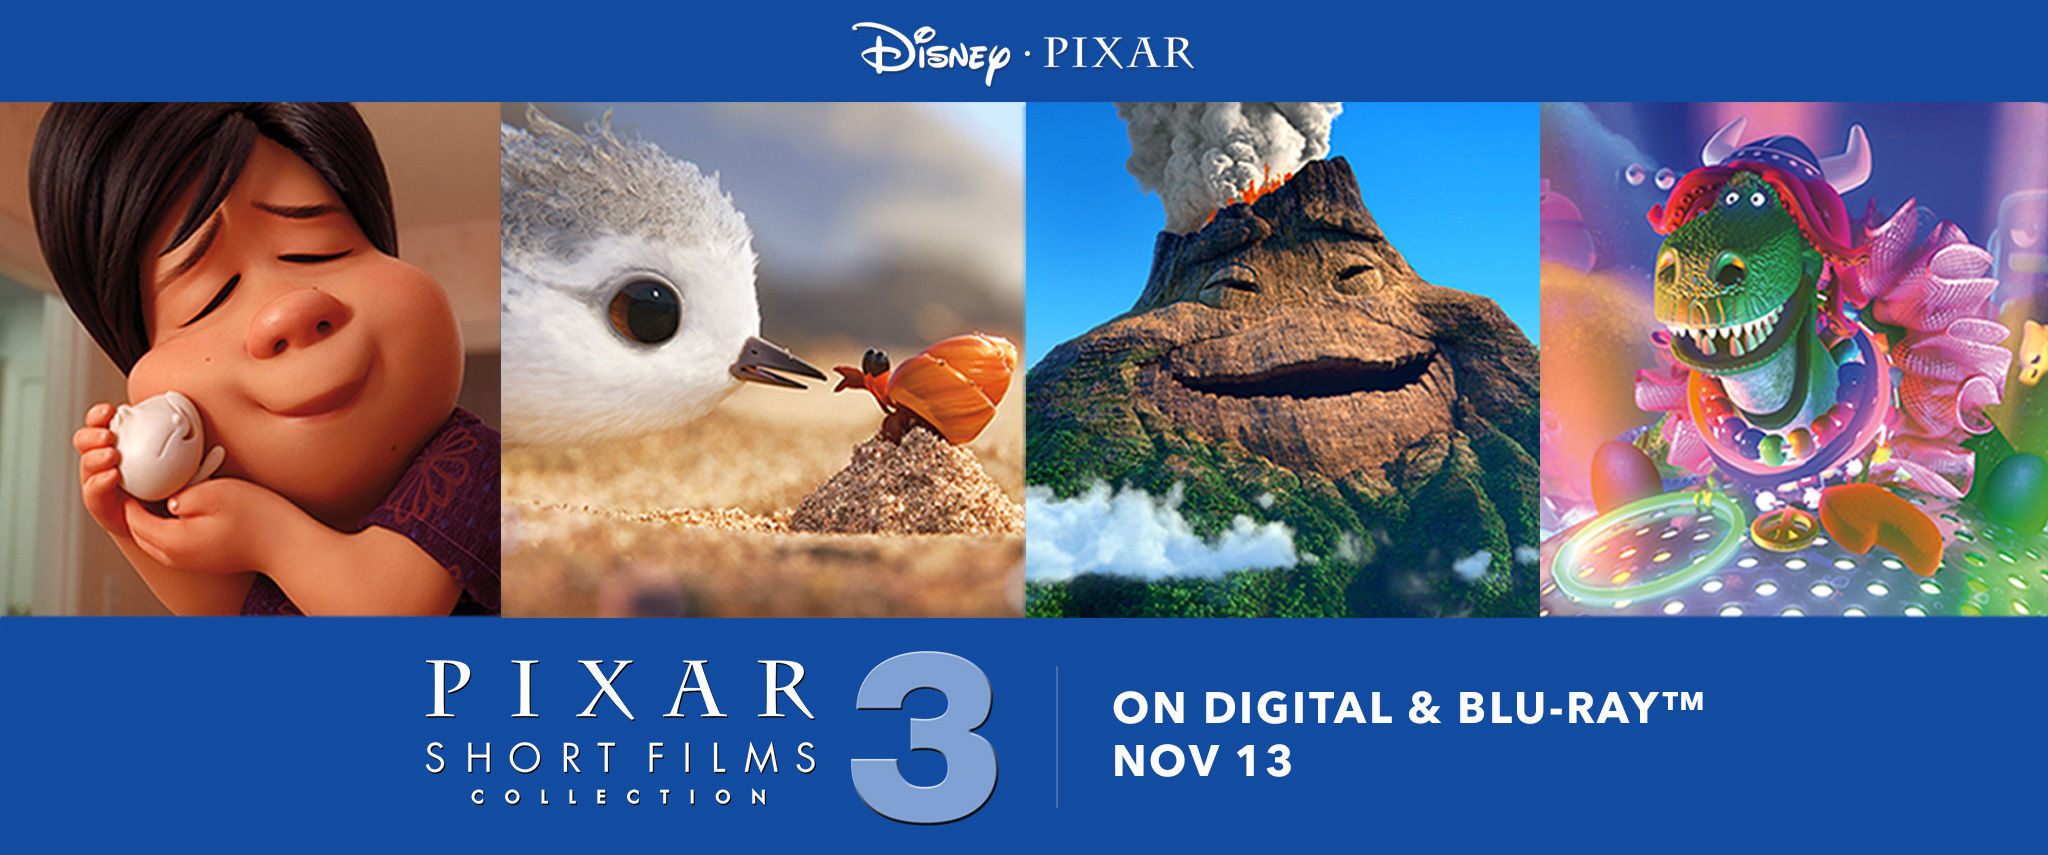 Pixar Short Film Collection Vol On Blu Ray And Digital This November